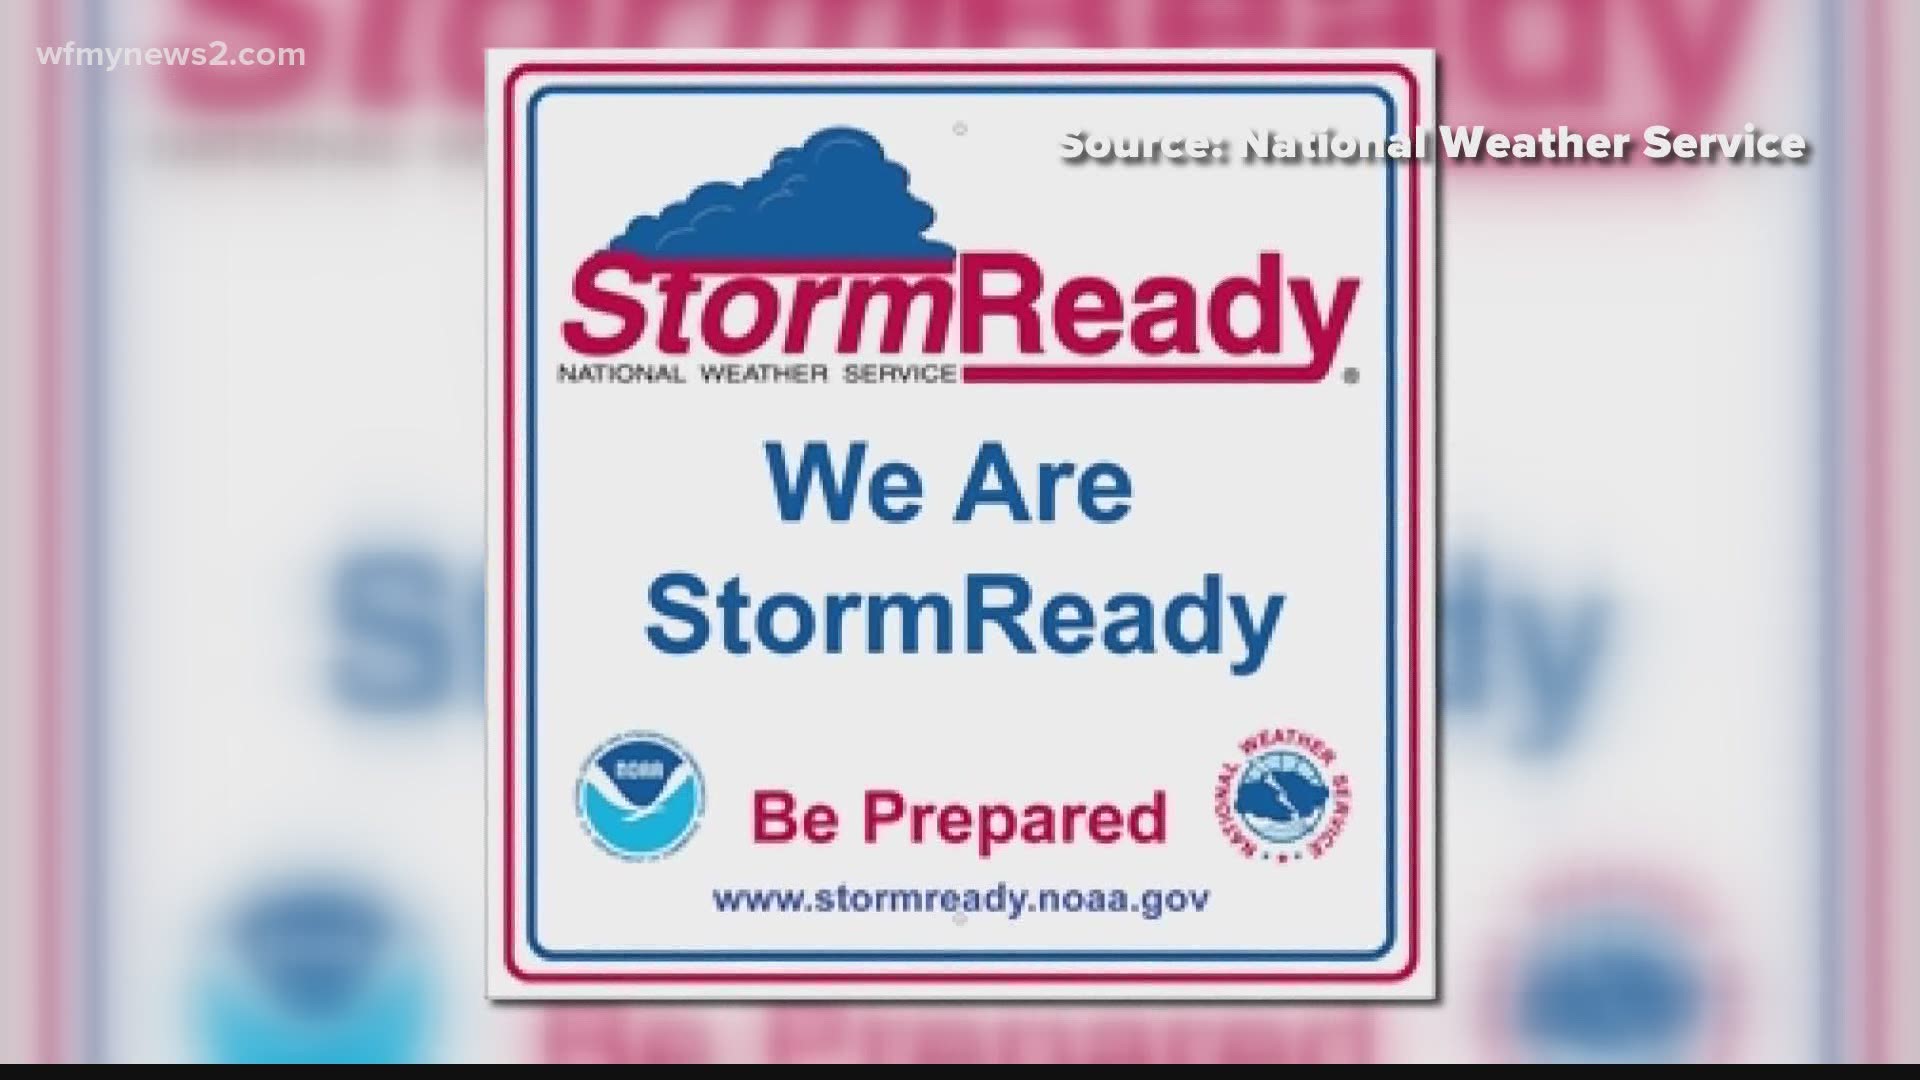 The county was named stormready thanks to their work in the community when storms strike.